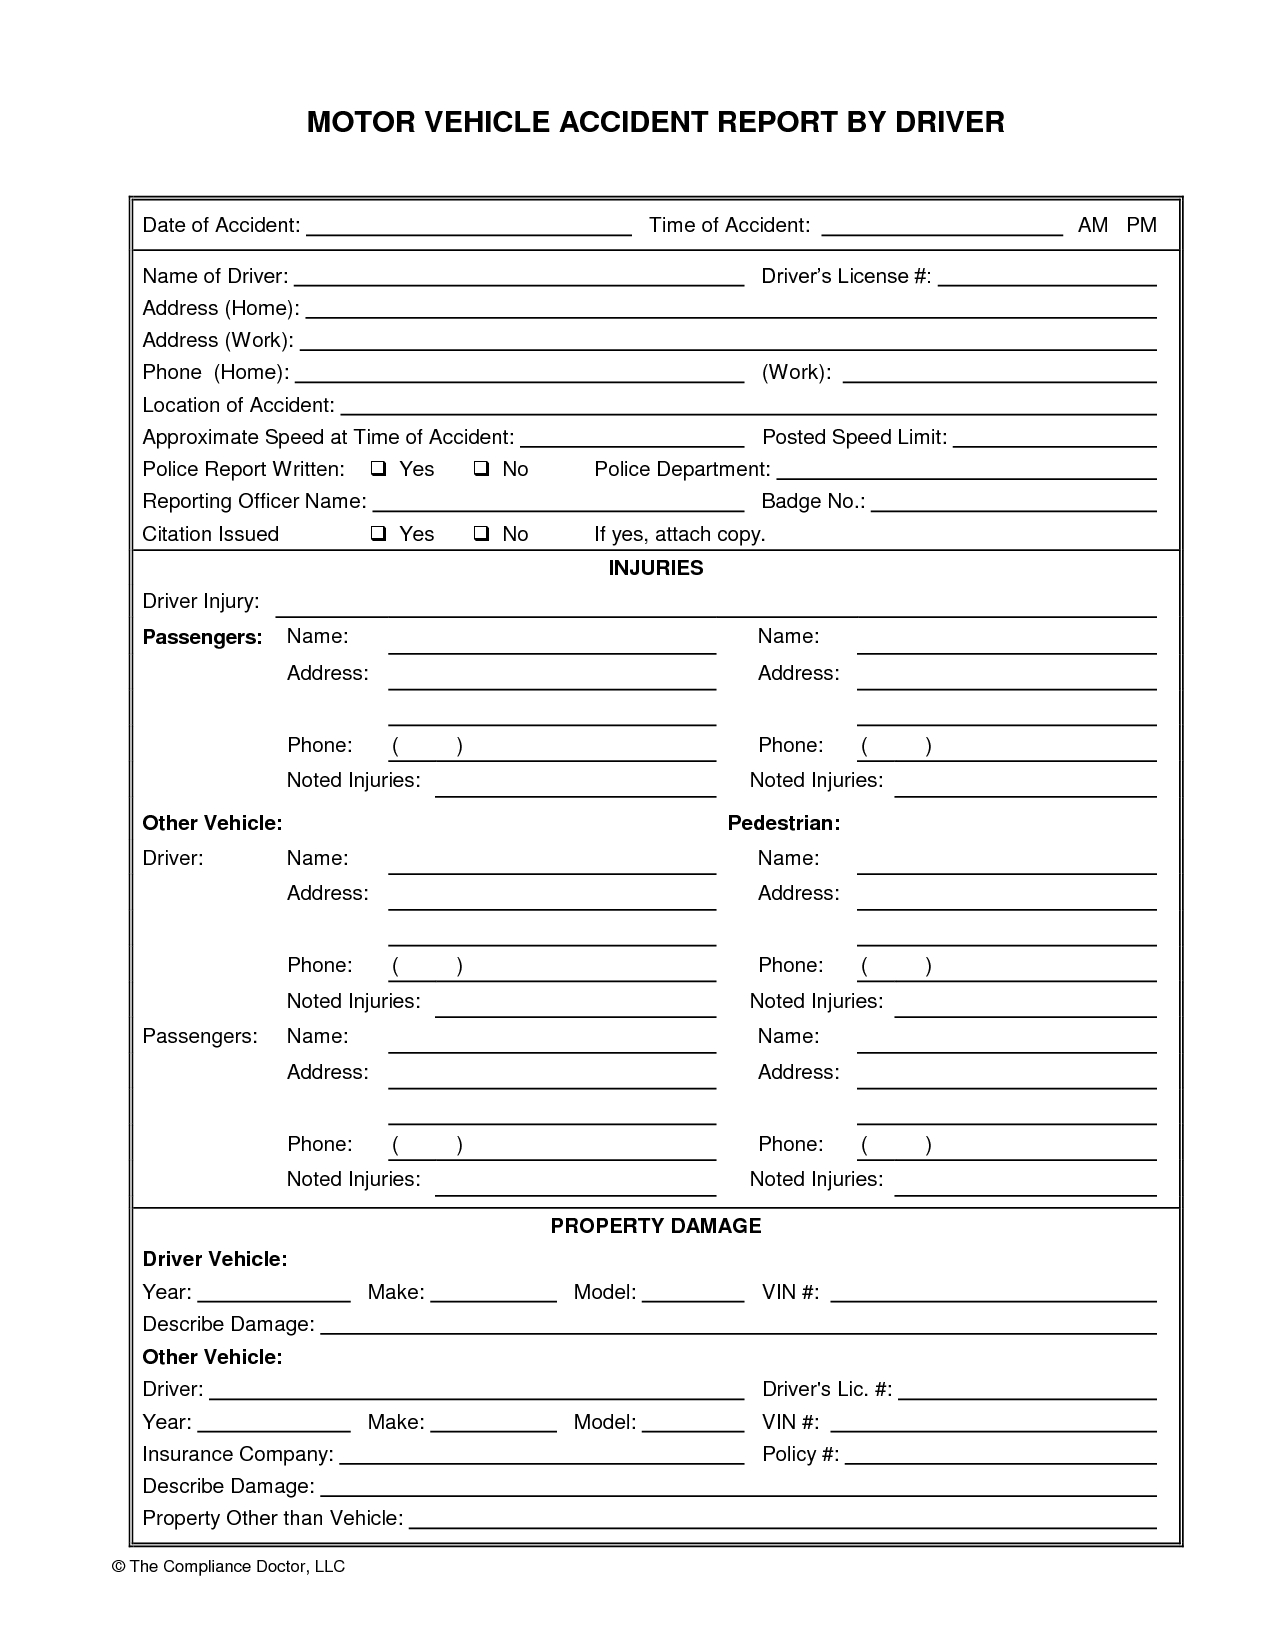 Eb9 Vehicle Damage Report Template | Wiring Library For Motor Vehicle Accident Report Form Template